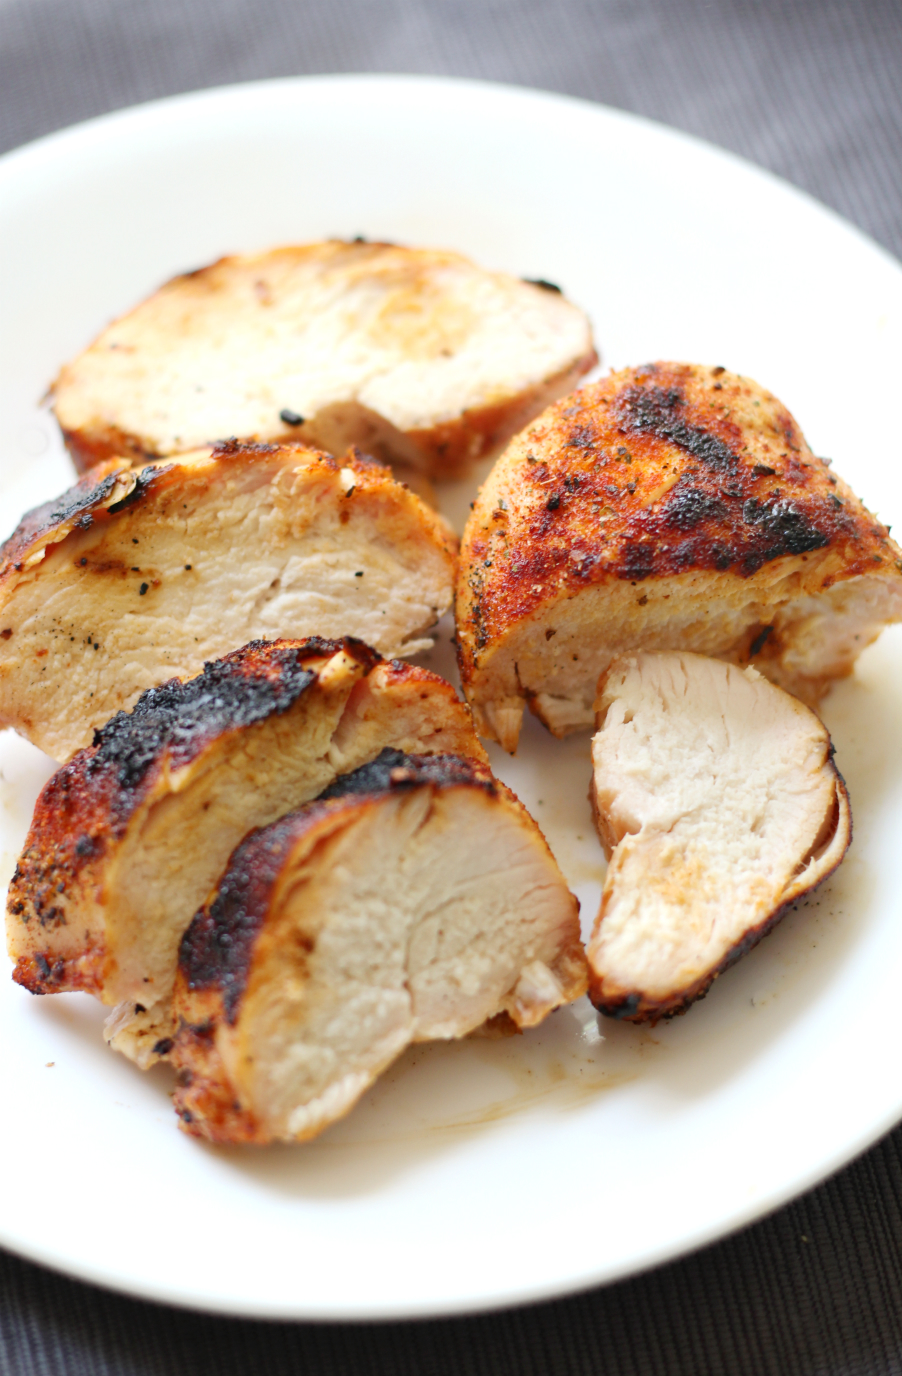 The Greatest Grilled Chicken Ever | Strength and Sunshine @RebeccaGF666 The Greatest Grilled Chicken...EVER! This no-fail recipe for the most flavorful, succulent, and tender chicken will be the only one you'll ever need! This method will produce the best poultry you've ever tasted! Gluten-free, paleo, oil-free, whole 30 approved healthy grilling dinner recipe!